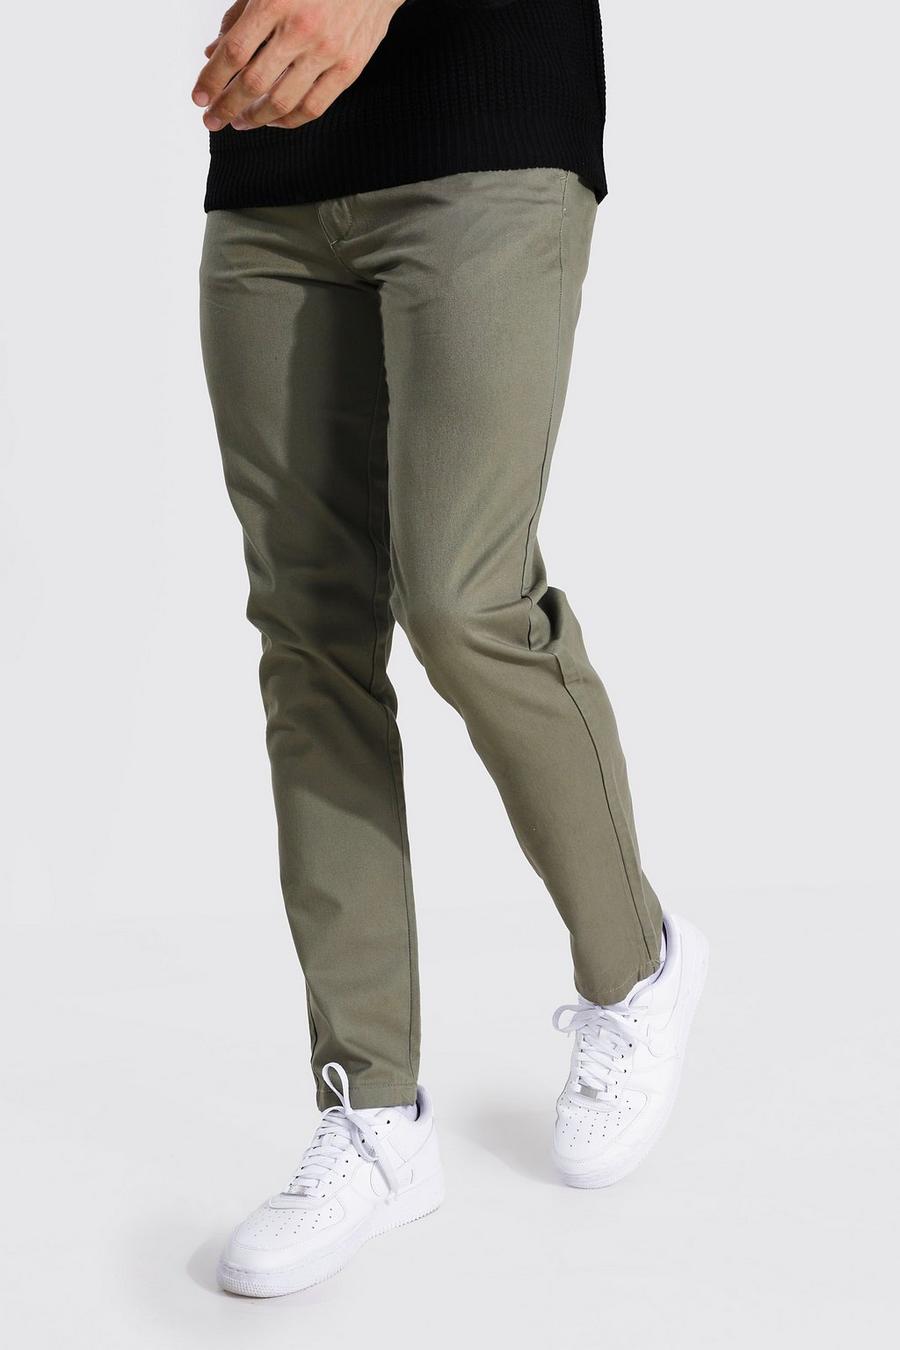 Khaki Tall Slim Fit Chino Trouser image number 1